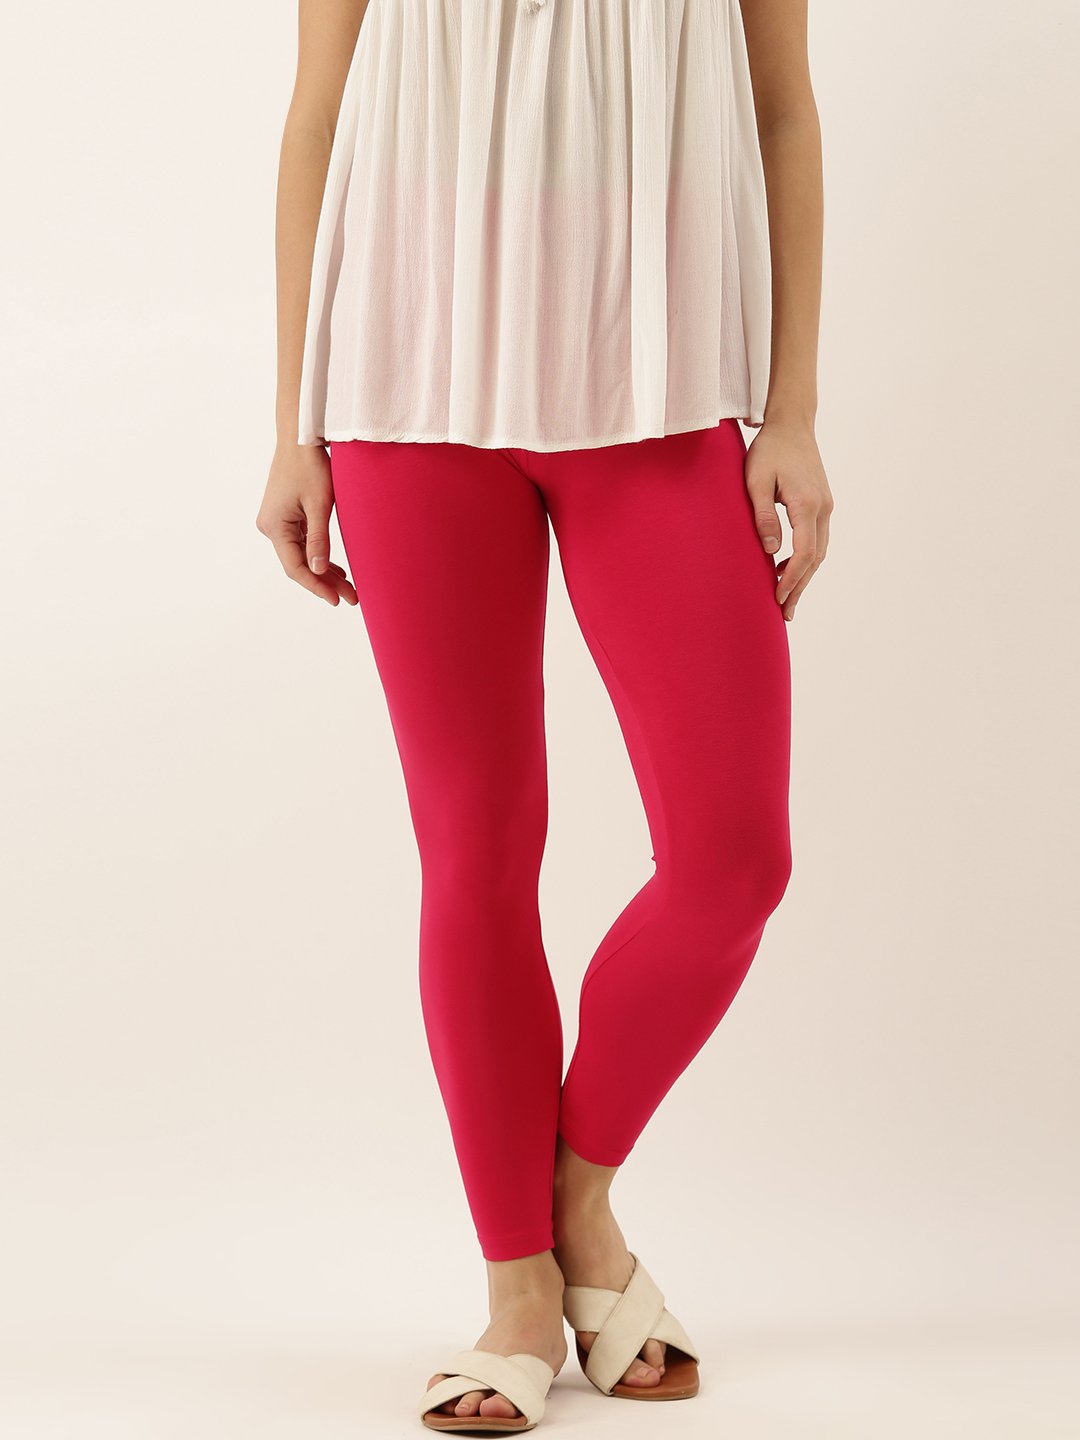 Fabulously Slimming Ankle Leggings - Chico's Off The Rack - Chico's Outlet